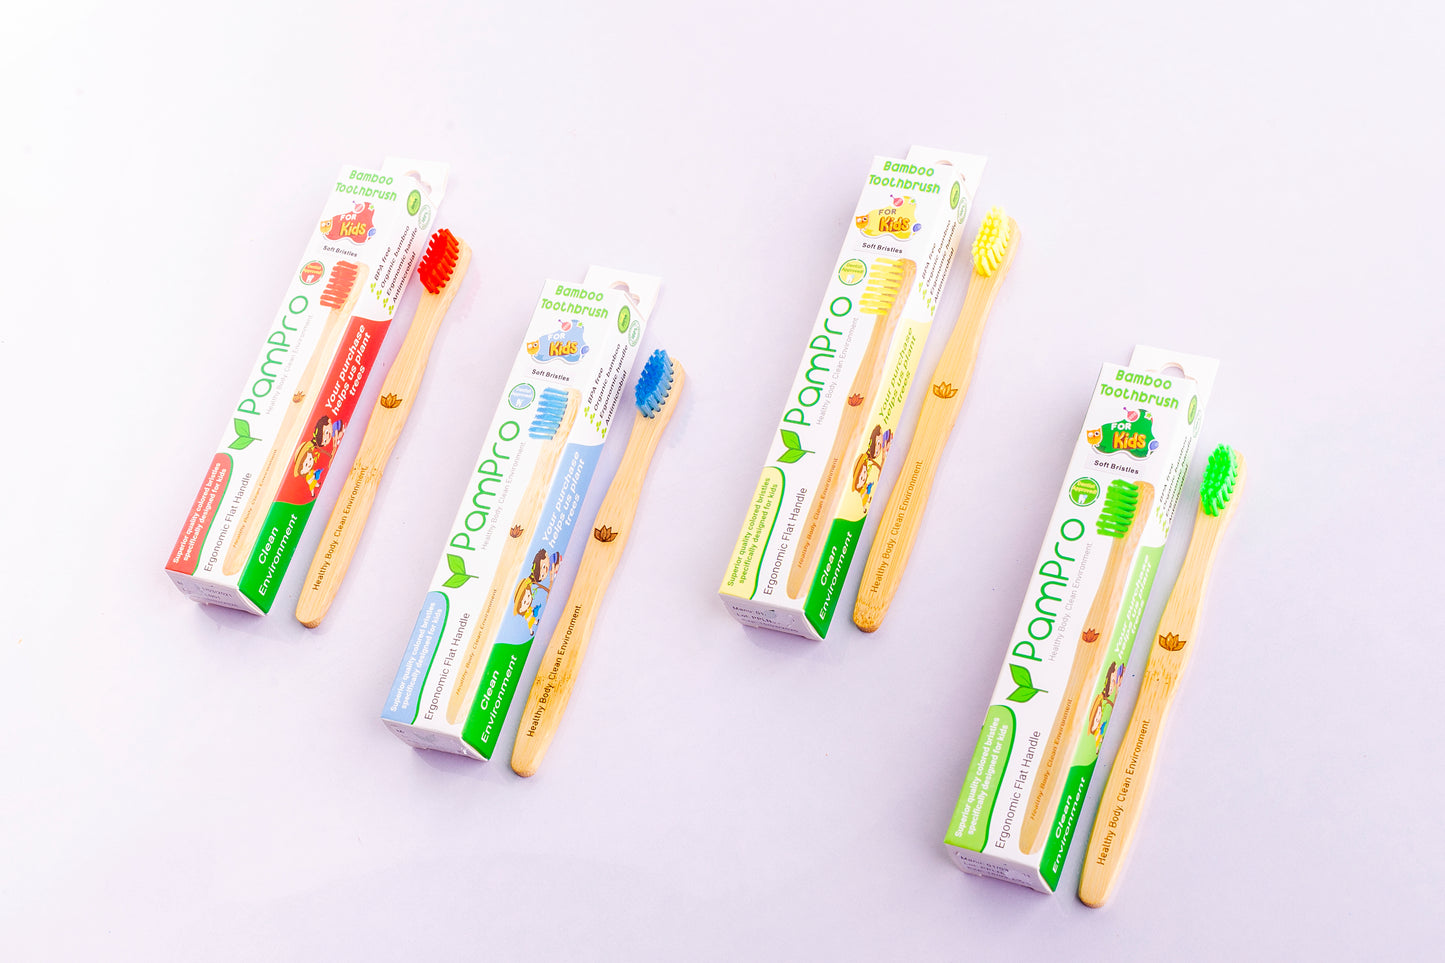 Toothbrushes, Bamboo